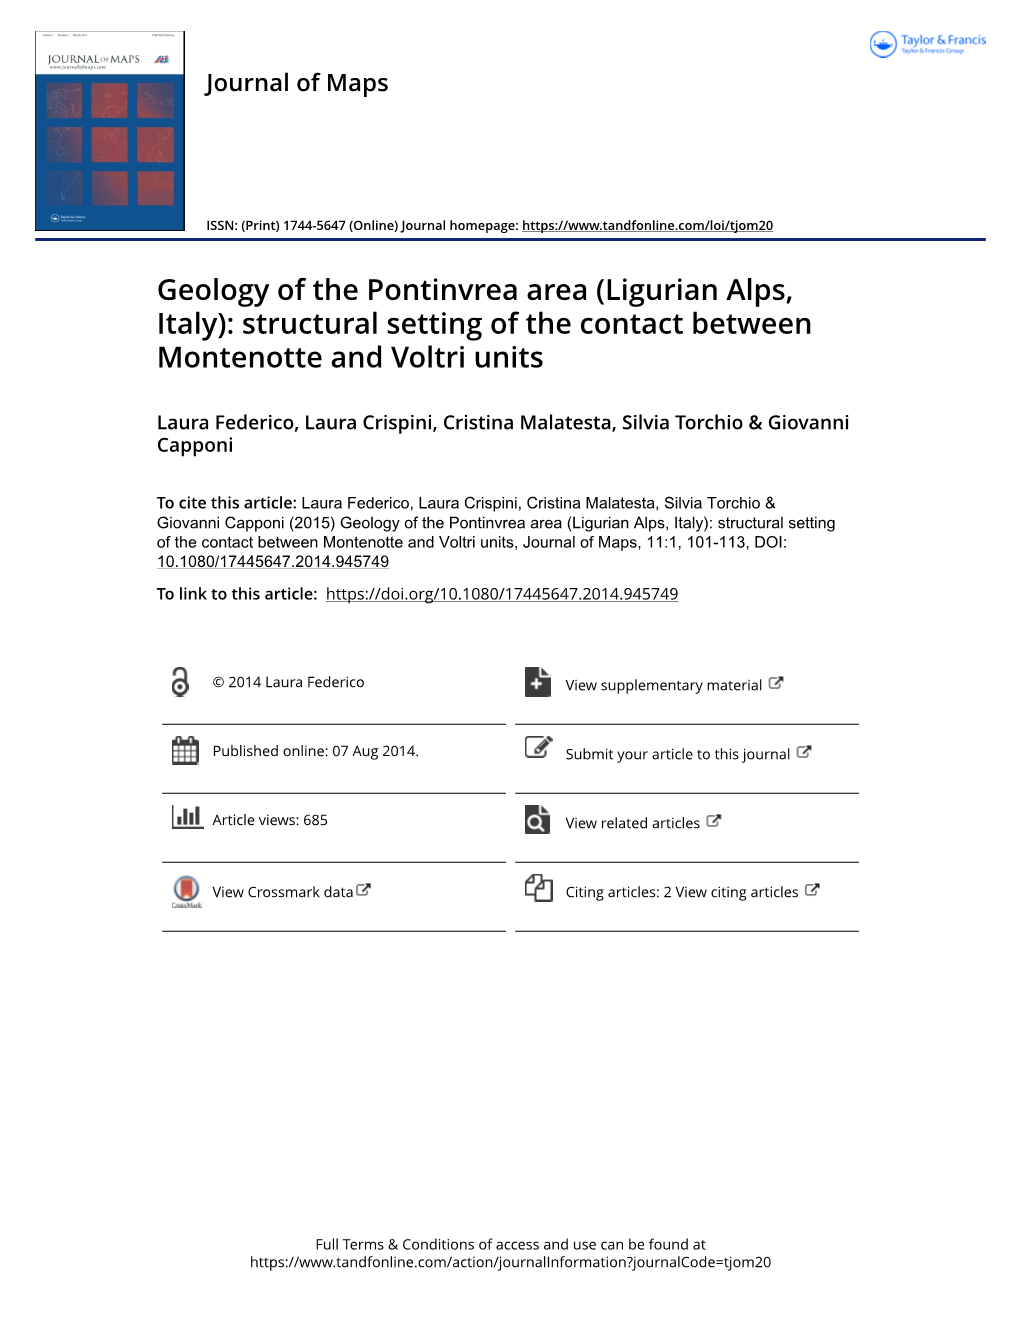 Geology of the Pontinvrea Area (Ligurian Alps, Italy): Structural Setting of the Contact Between Montenotte and Voltri Units